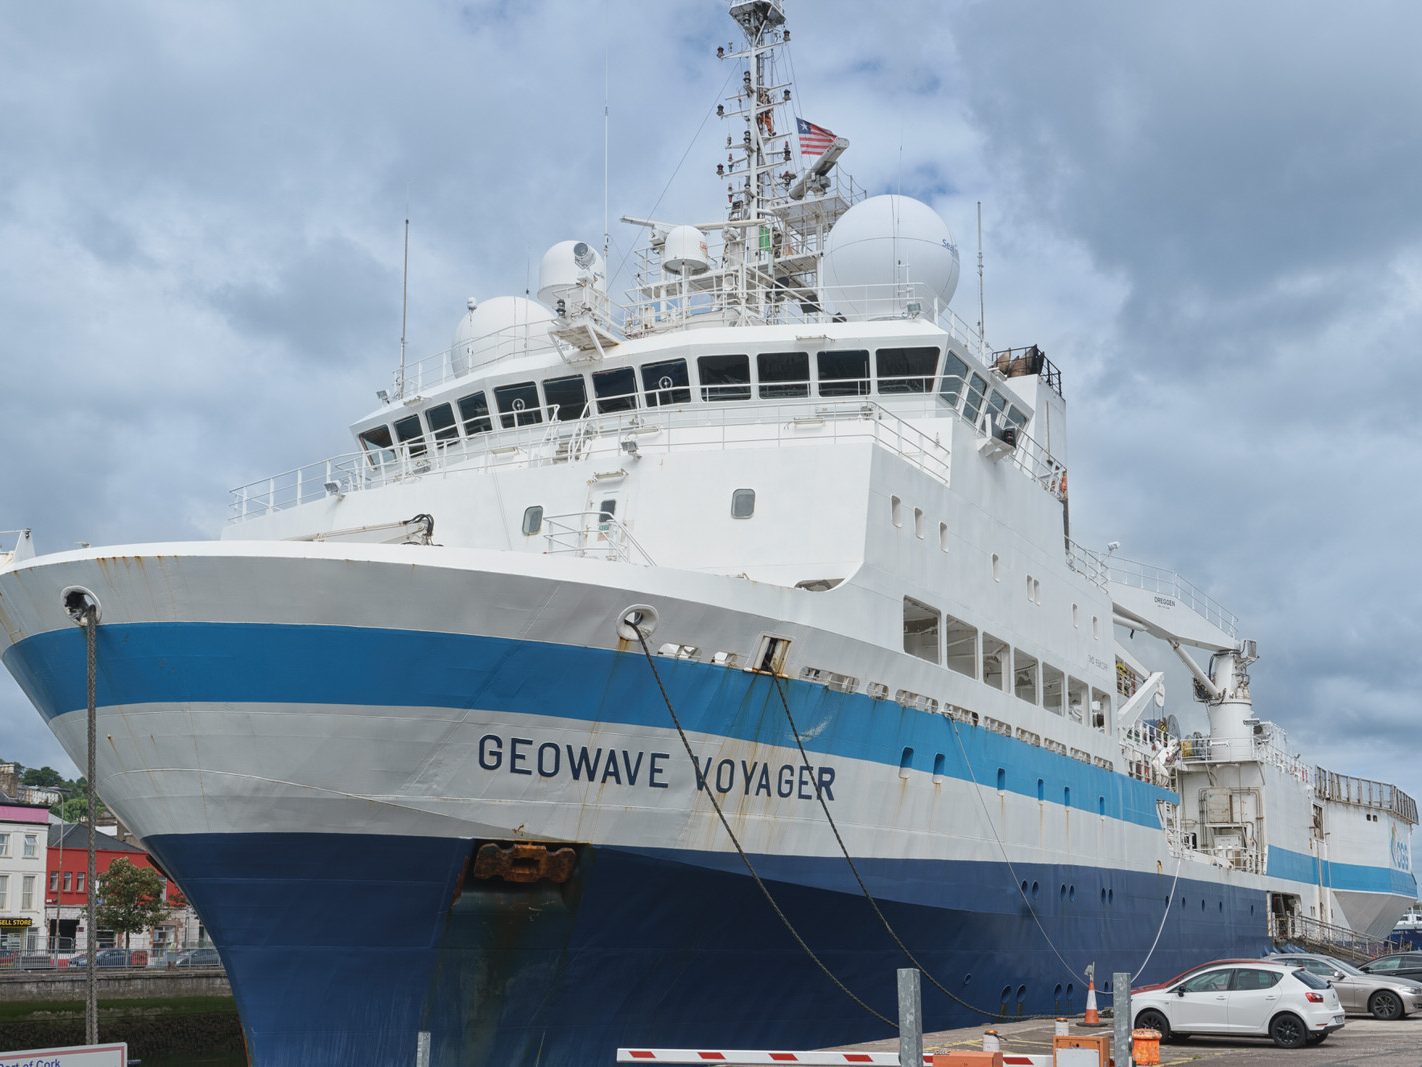 GEOWAVE VOYAGER LATER RENAMED EAGLE EXPLORER IMO 9381299 [AT CUSTOM HOUSE QUAY IN CORK JULY 2016] 014